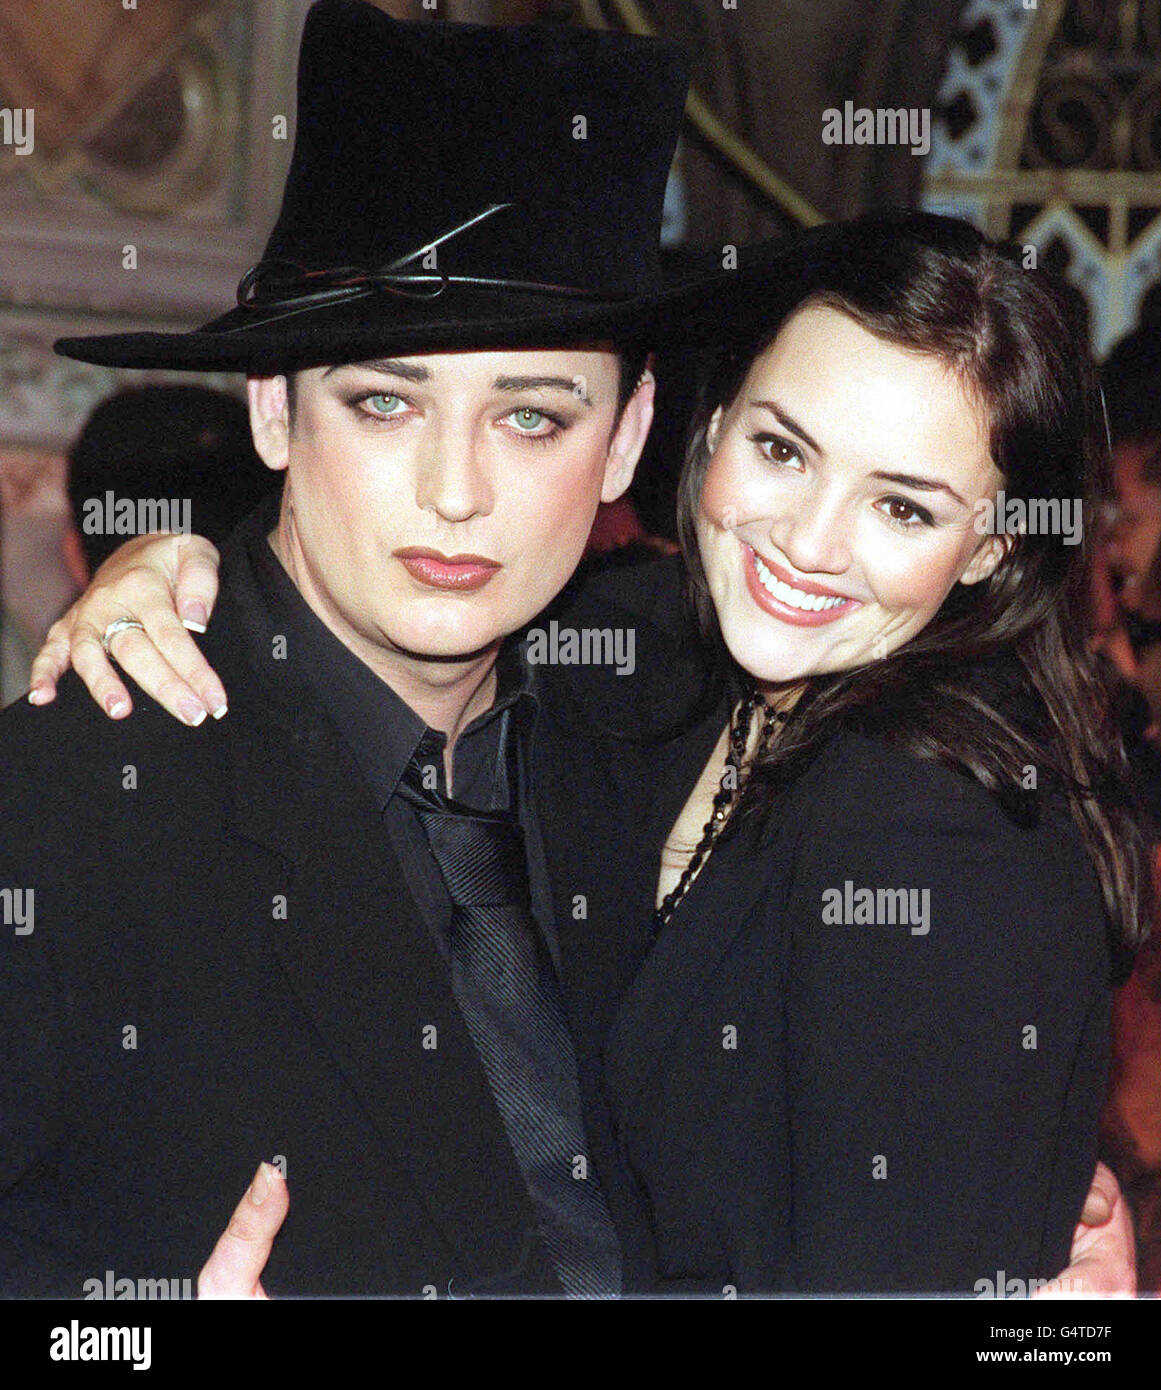 Pop stars Boy George (L) and Martine McCutcheon at the recording of A Gospel Celebration, at the Union Chapel, Islington. The singers joined other stars to perform with the London Community Gospel Choir, to record an evening of music for BBC Radio 2. * ...to be transmitted on December 30th 1999. 16/3/2001: The former EastEnder and pop star has wowed the critics with her first night performance as Eliza Doolittle in the West End's My Fair Lady - a role that has been described as mirroring her own life. Stock Photo